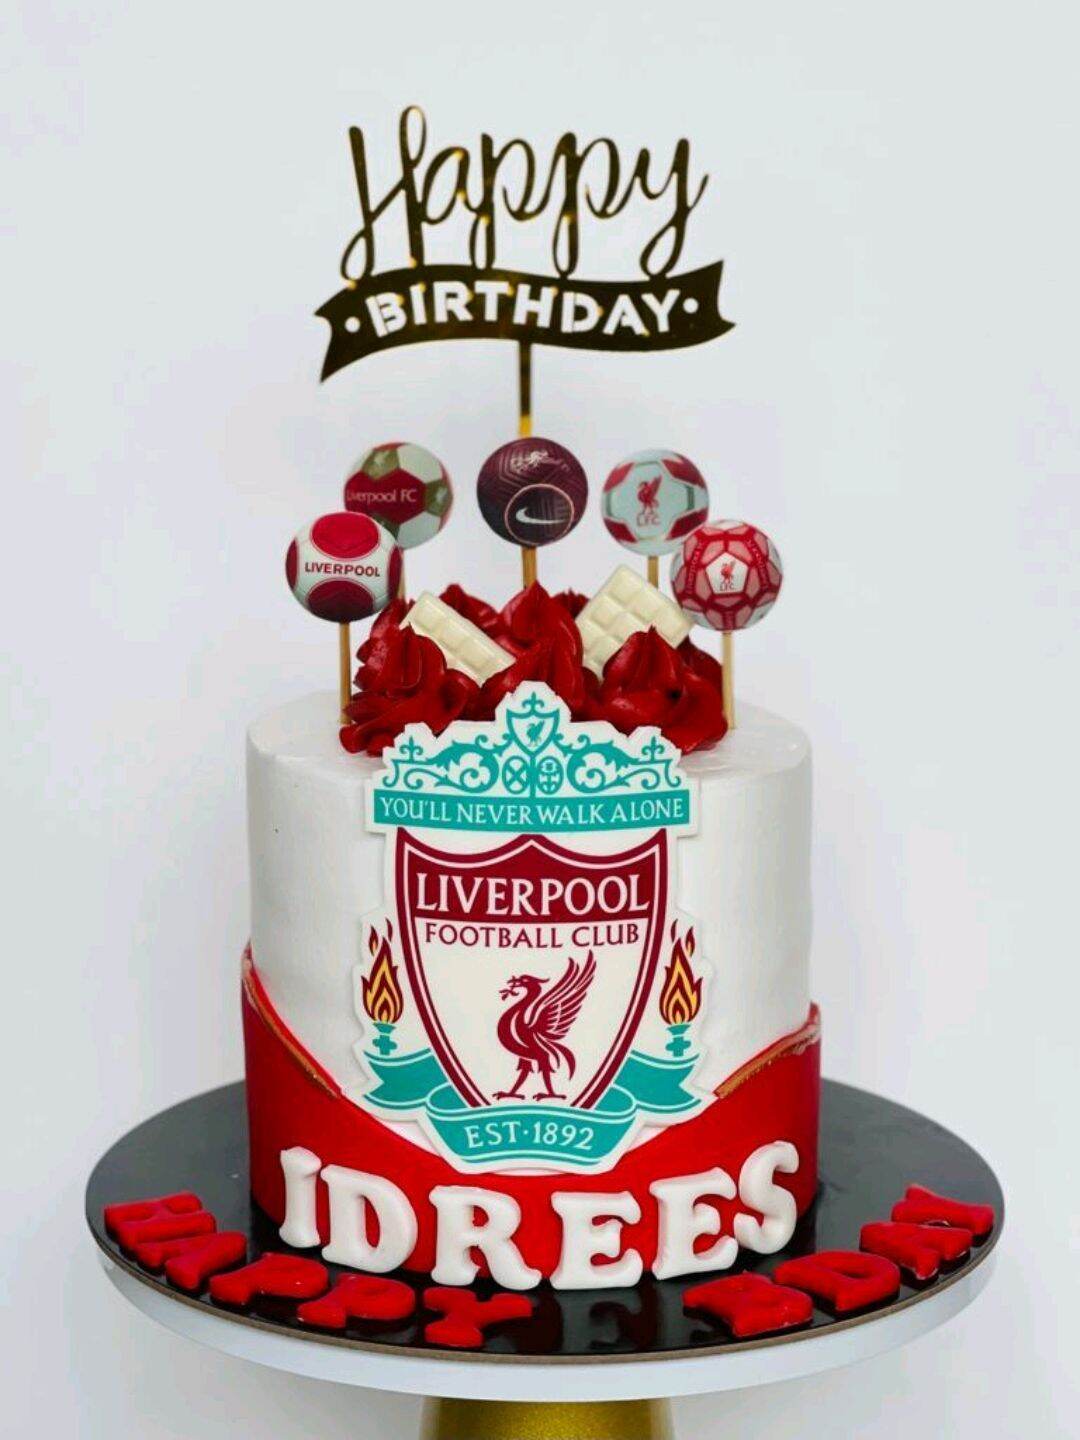 45 Awesome Football Birthday Cake Ideas : Liverpool Cake for 13rd Birthday